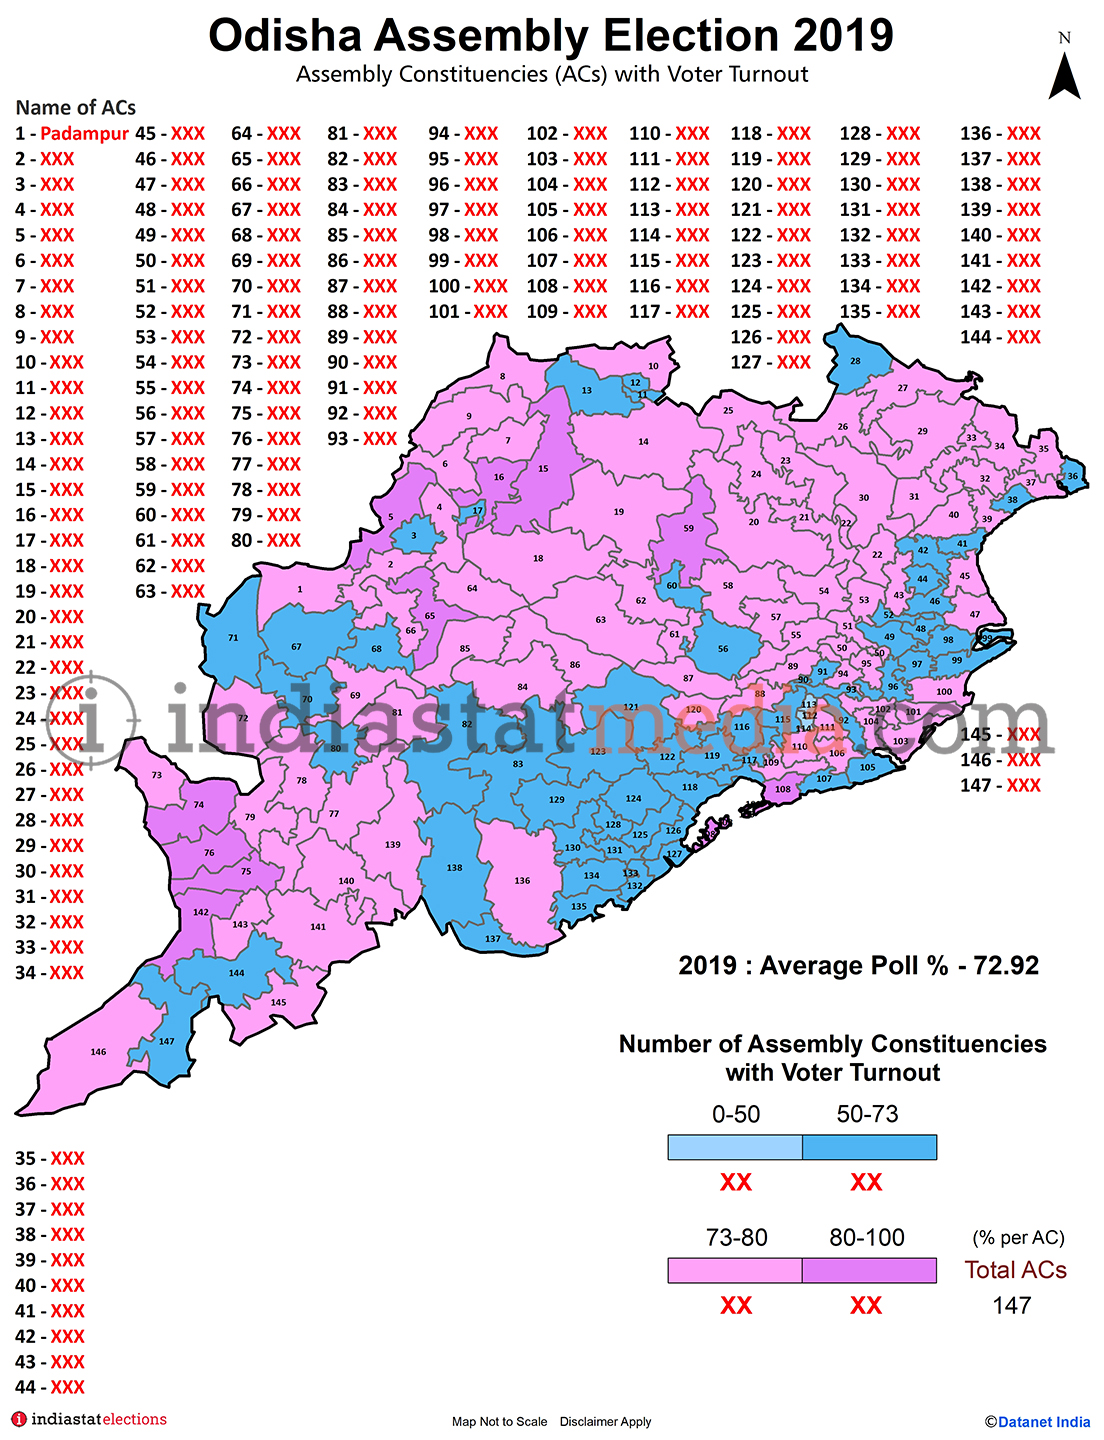 Assembly Constituencies (ACs) with Voter Turnout in Odisha (Assembly Election - 2019)